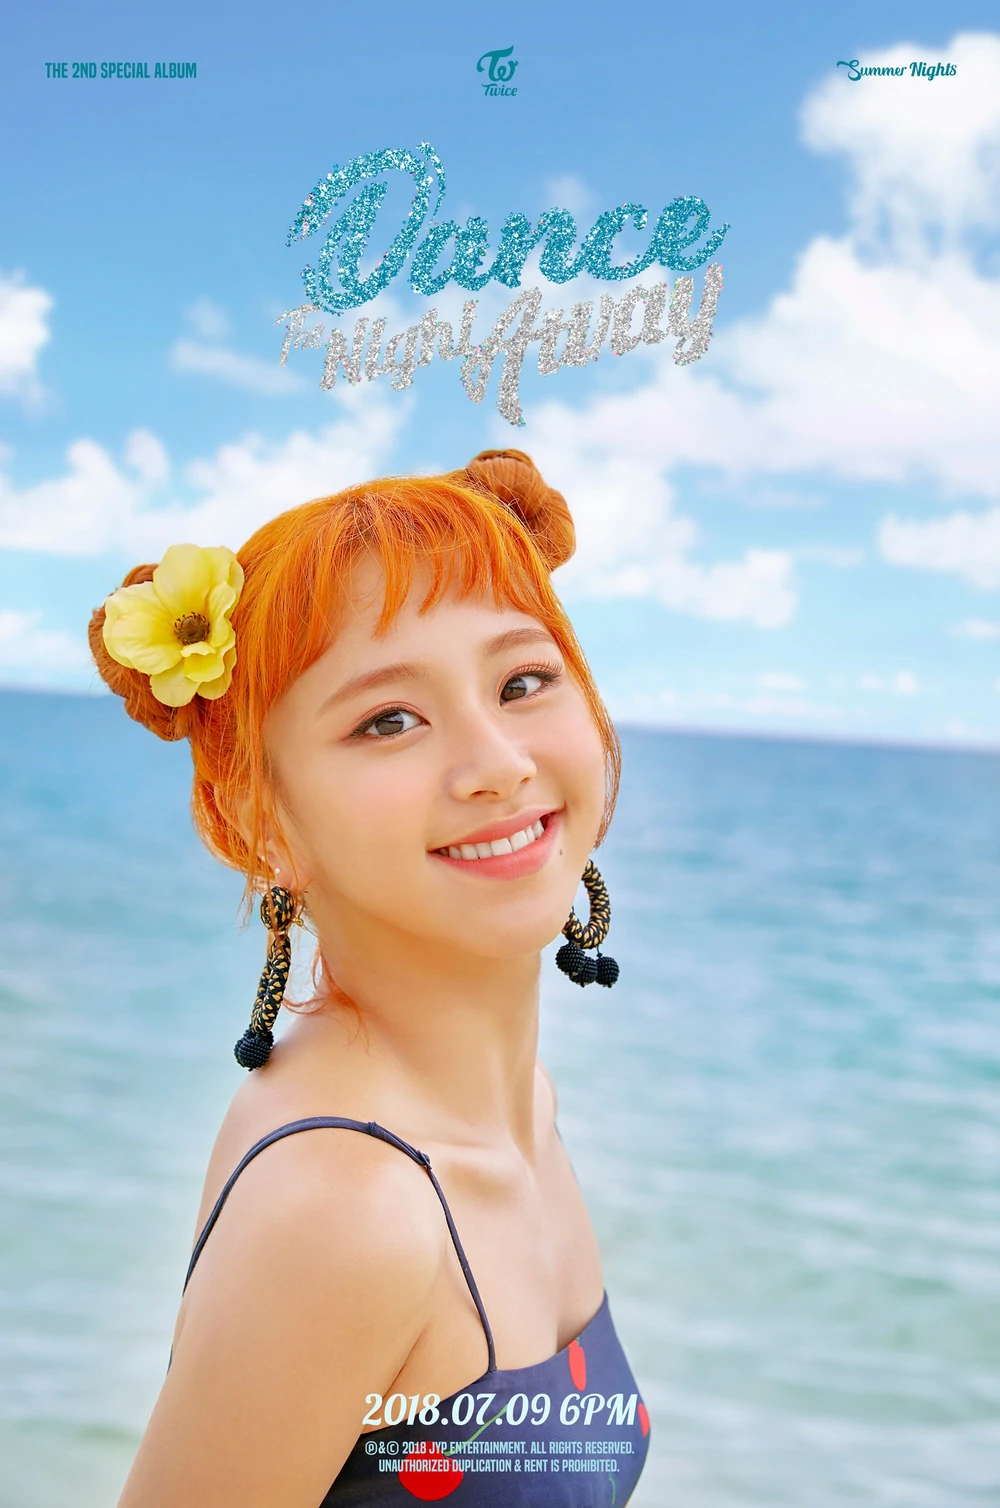 Twice Summer Nights Chaeyoung Concept Teaser Picture Image Photo Kpop K-Concept 3